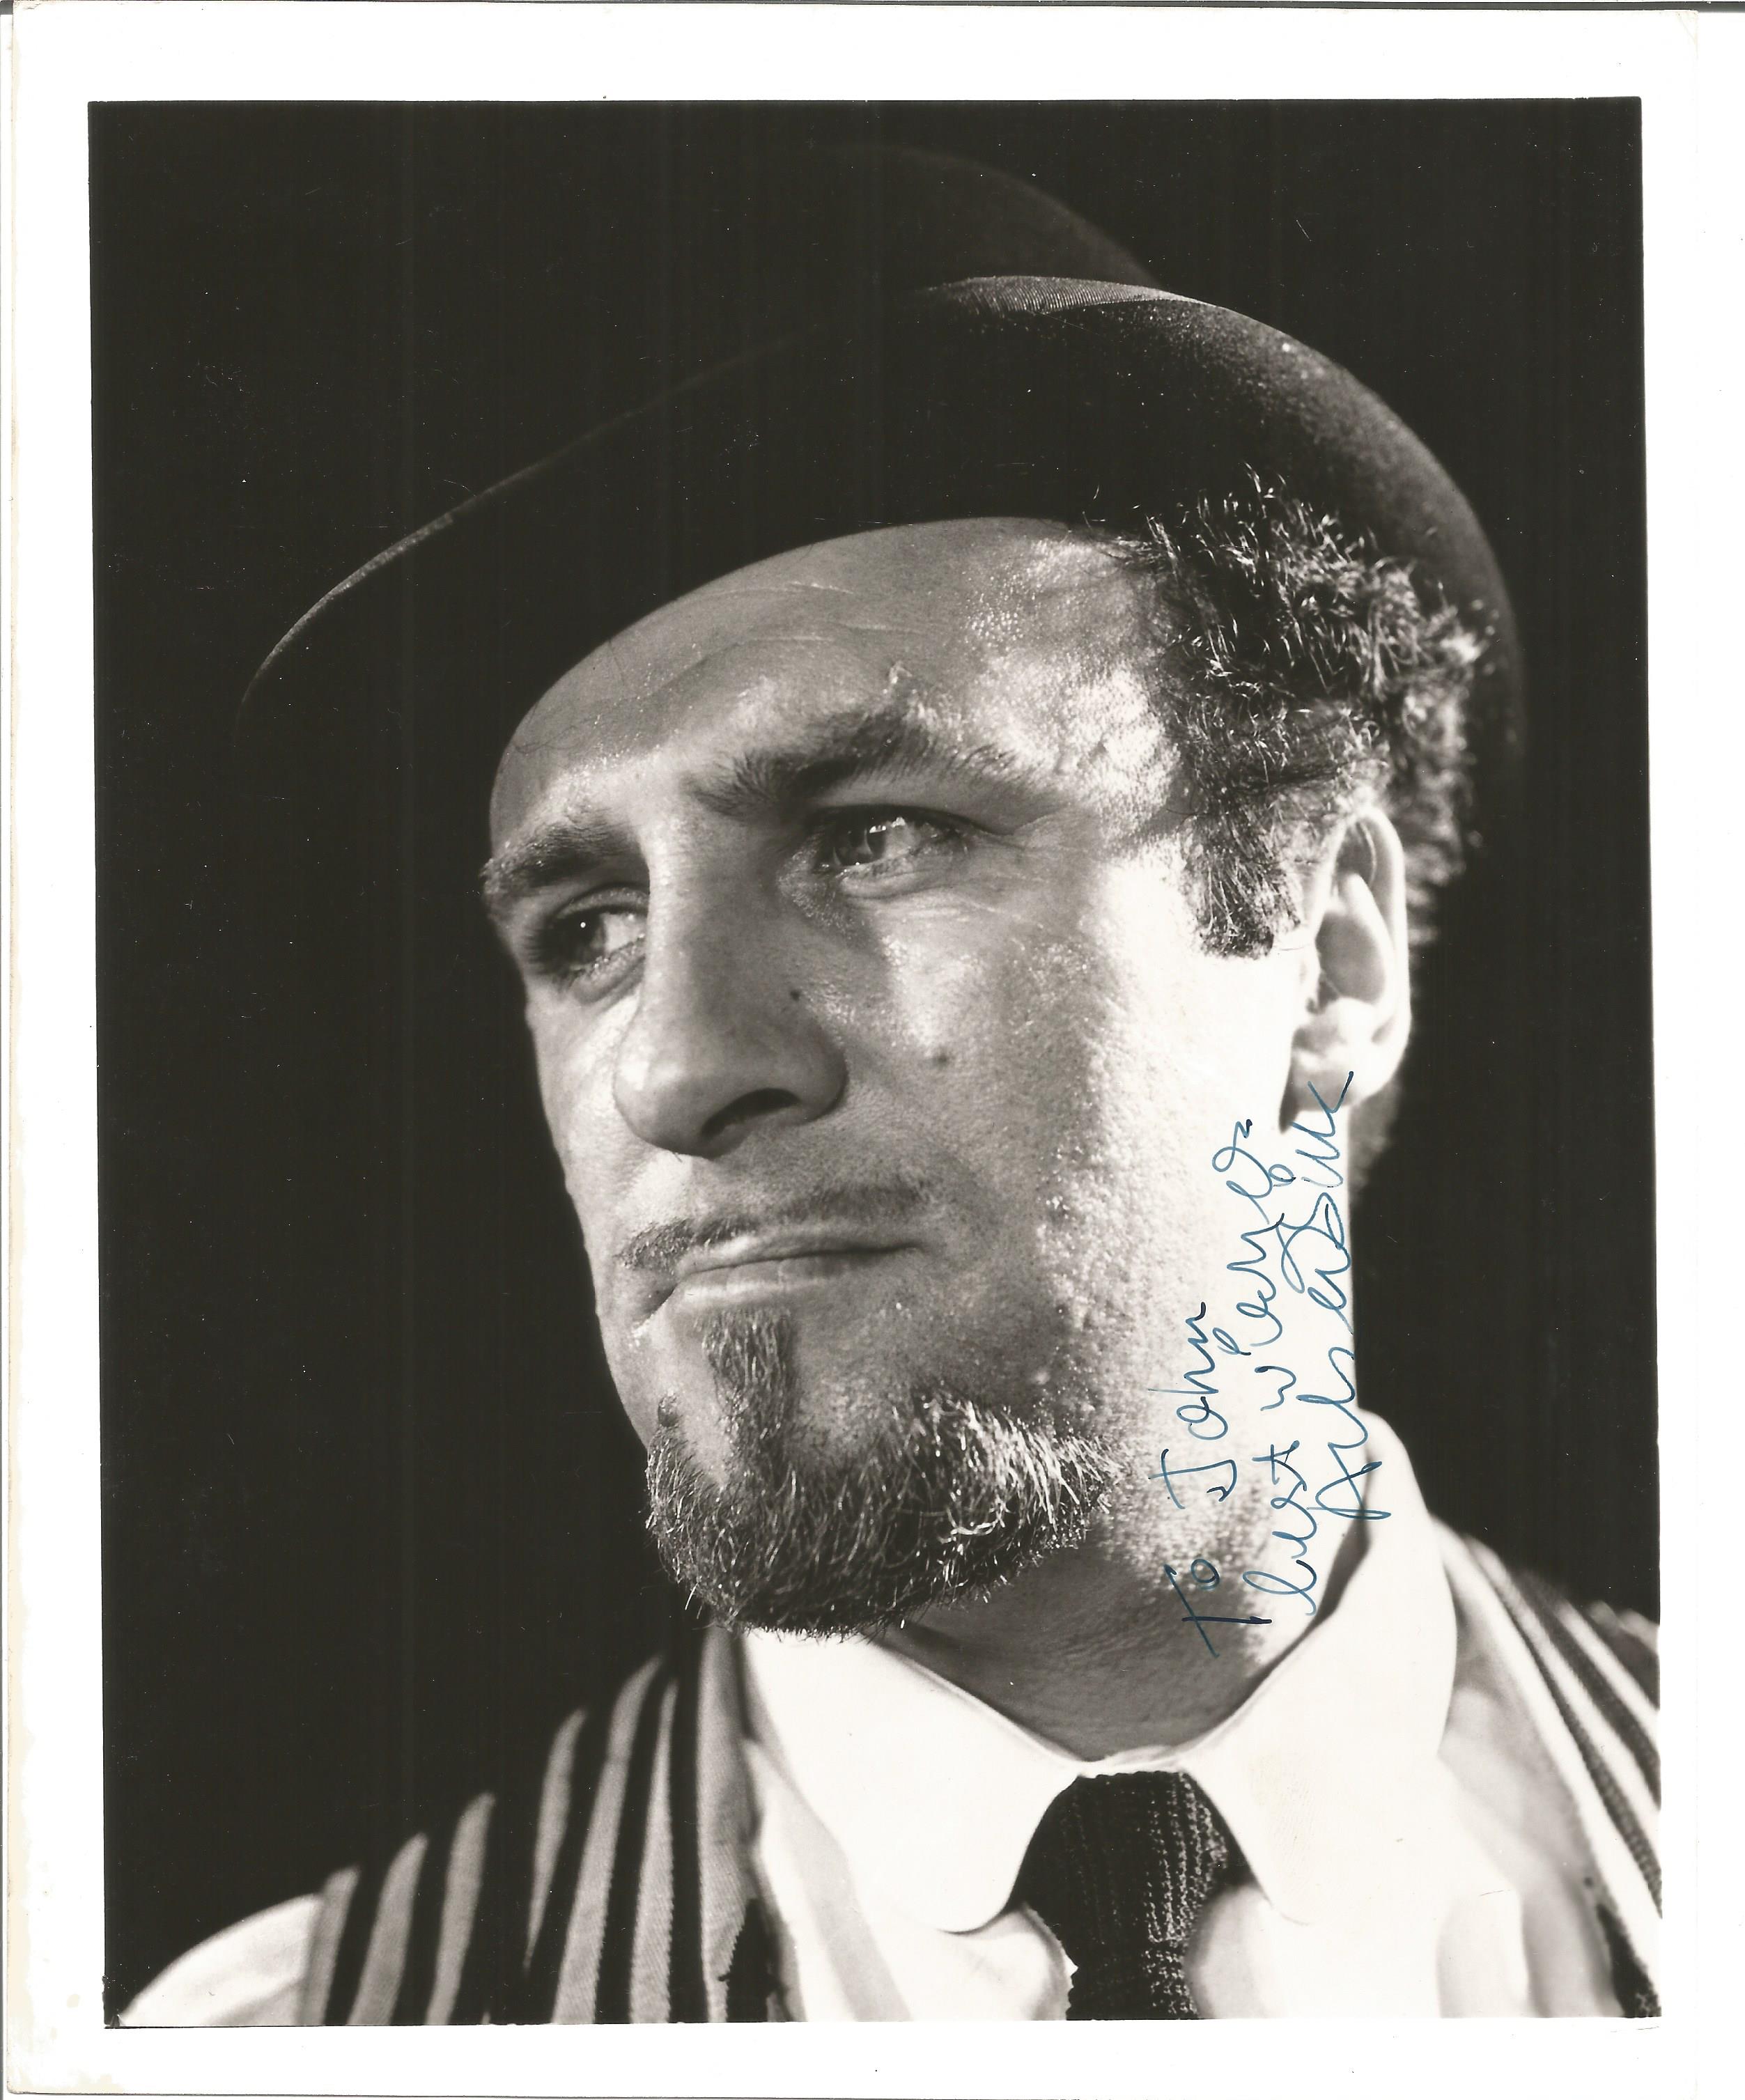 Acker Bilk British Musician Signed 10x8 B/W Photo To John. Good condition. All autographs come